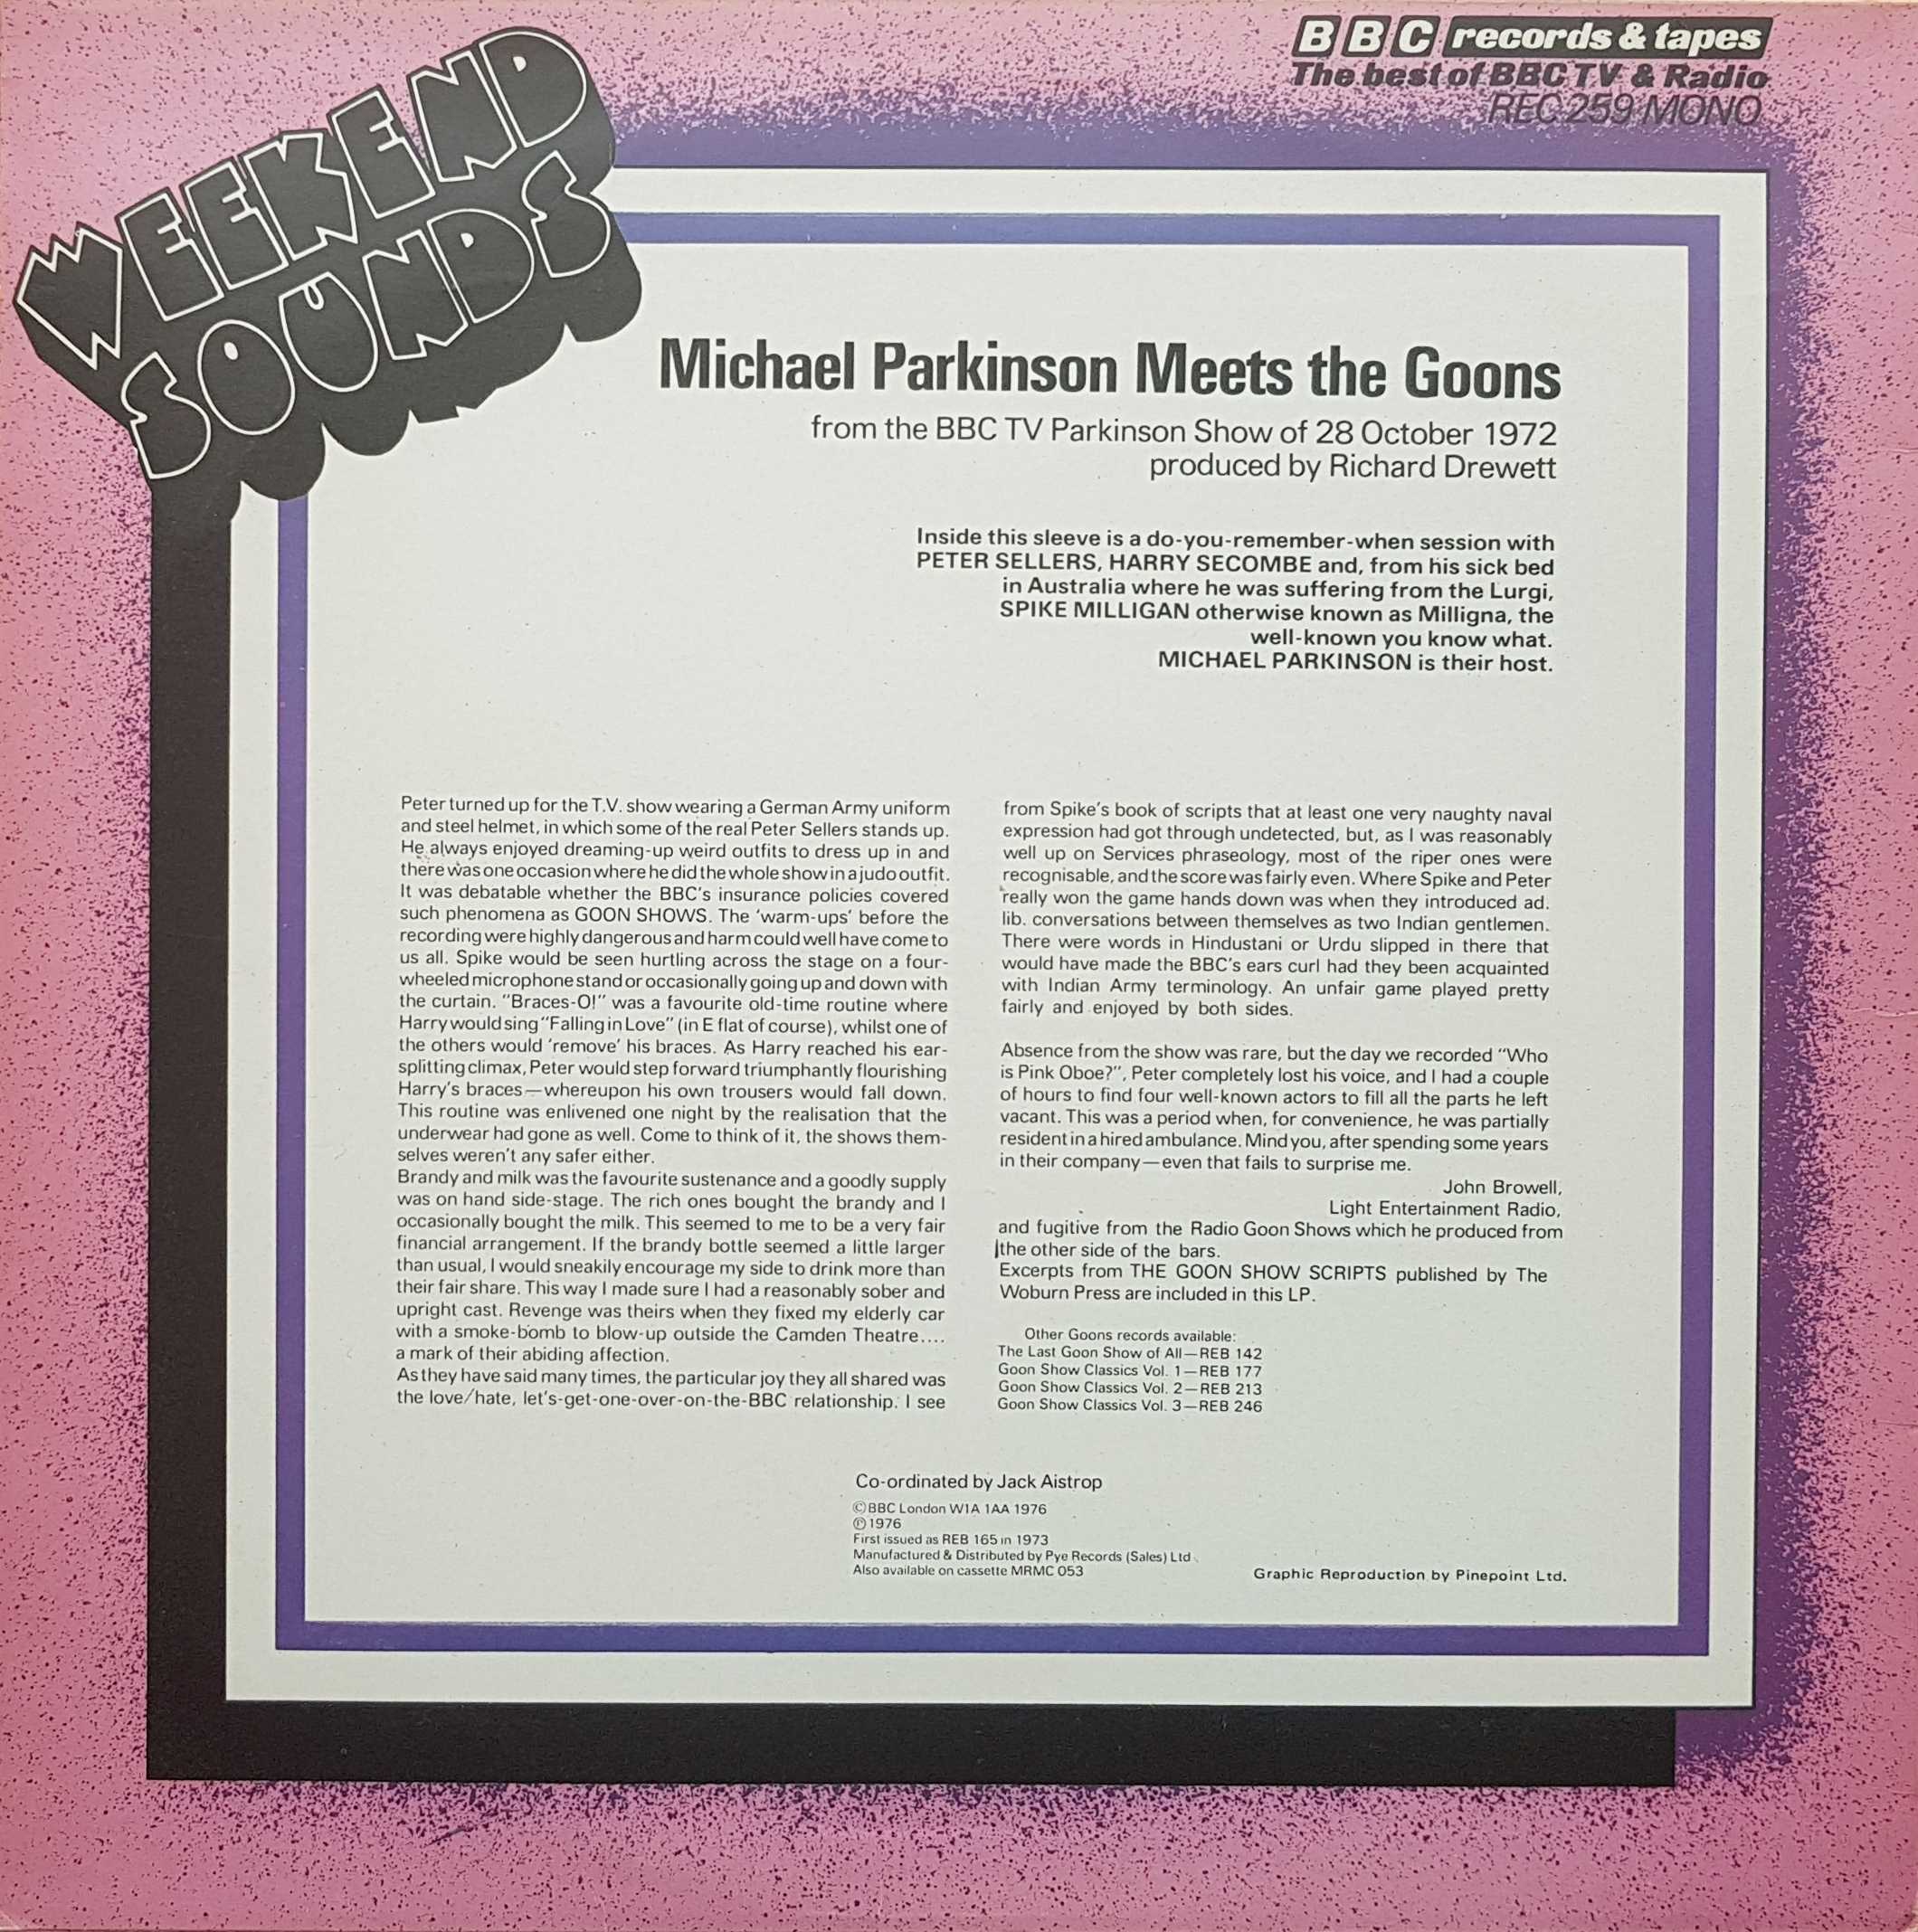 Picture of REC 259 Parkinson meets the Goons by artist Michael Parkinson from the BBC records and Tapes library